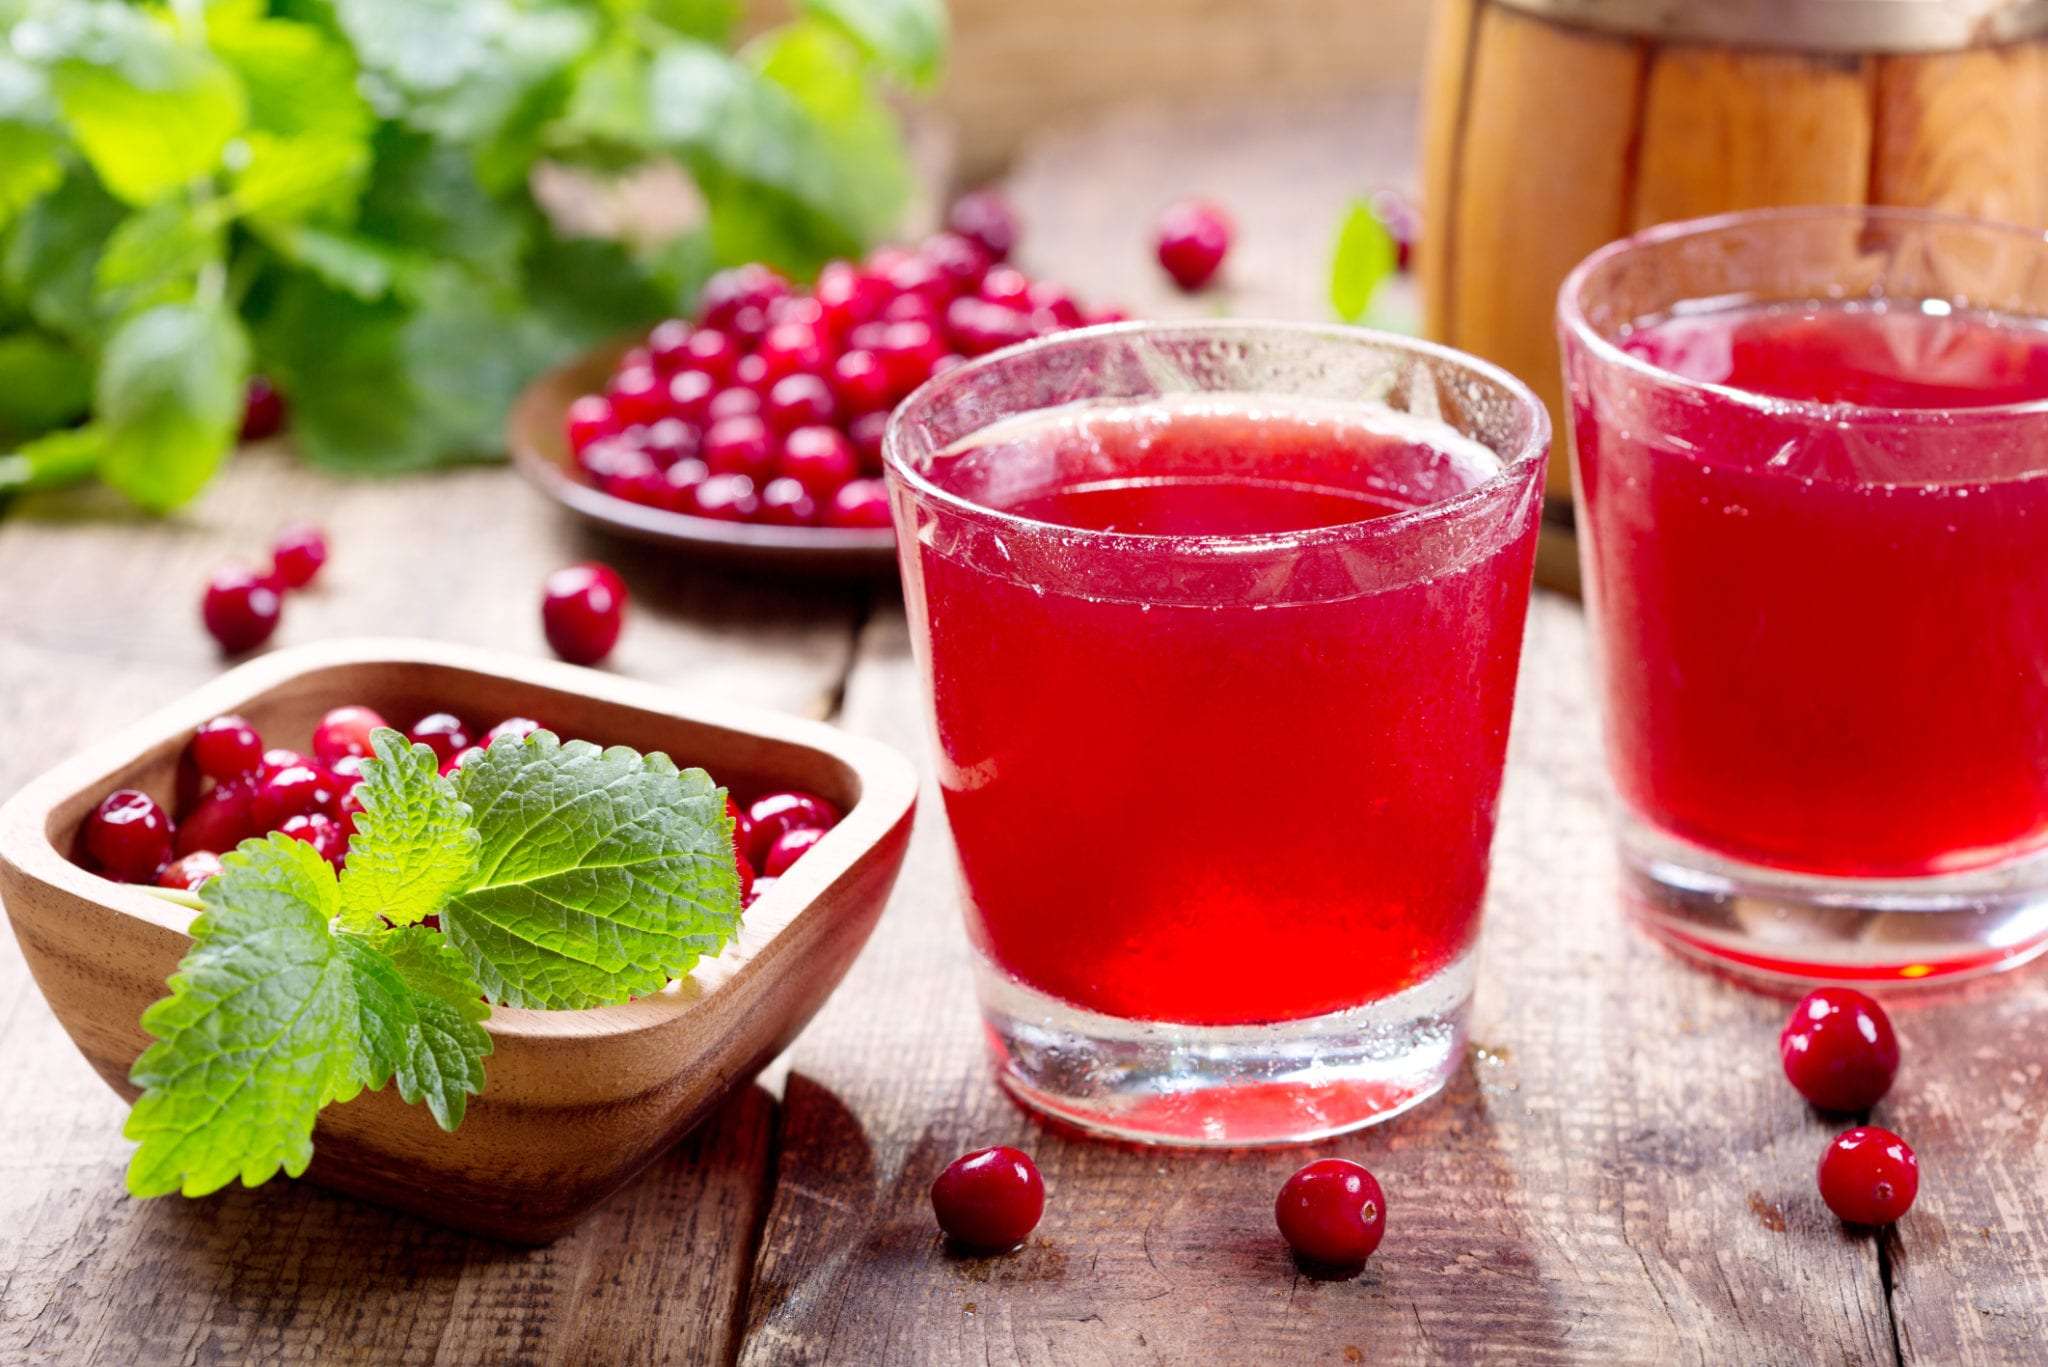 Cranberry juice treats urinary tract infection &  aids weight loss